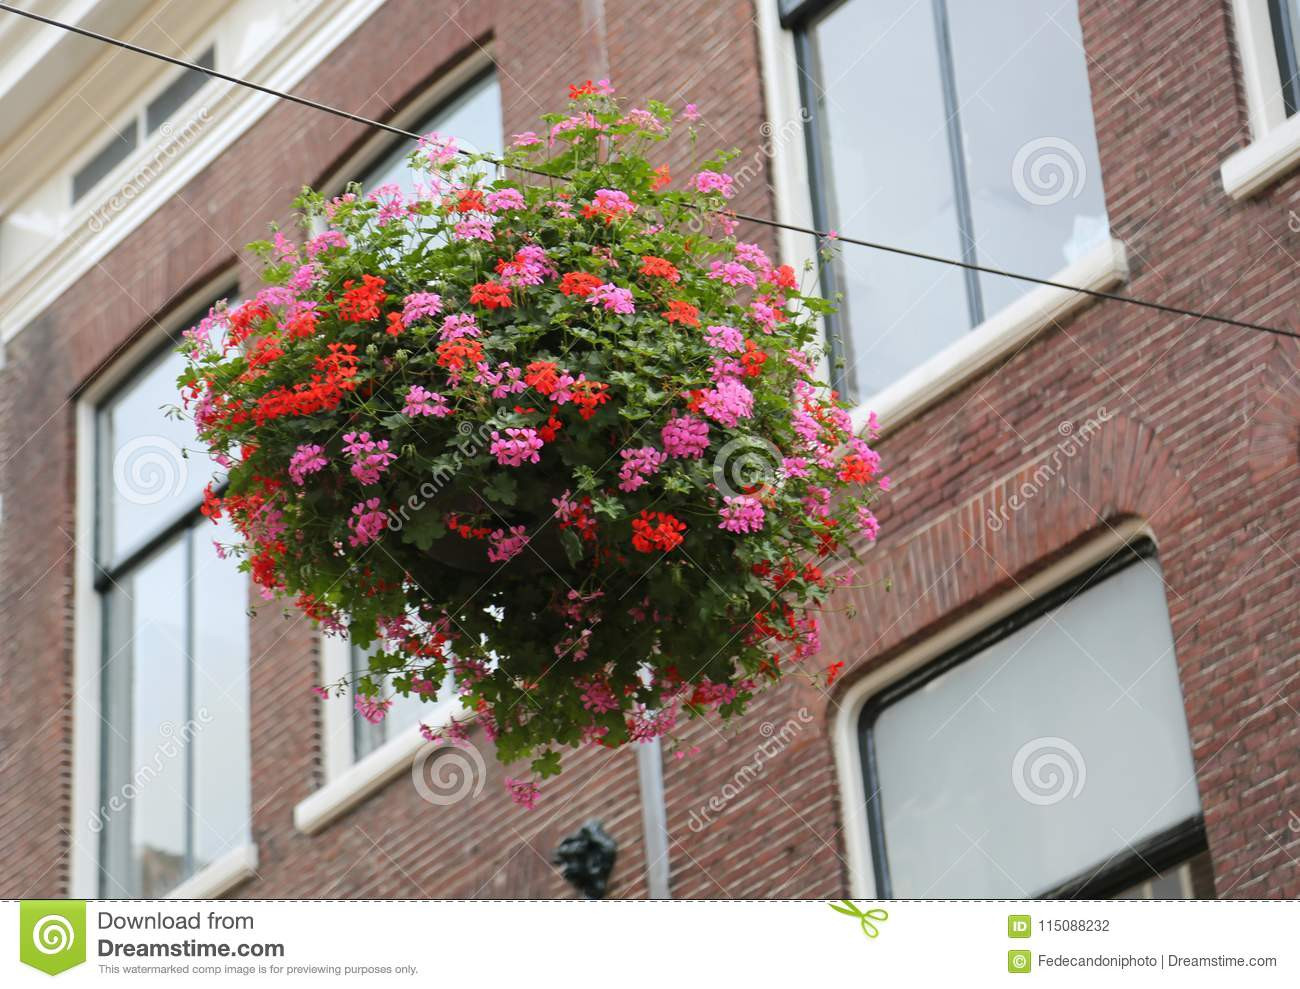 23 attractive Glass Bubble Wall Vase 2024 free download glass bubble wall vase of vase of pink and red geraniums hanging by a thread over a road i intended for download vase of pink and red geraniums hanging by a thread over a road i stock